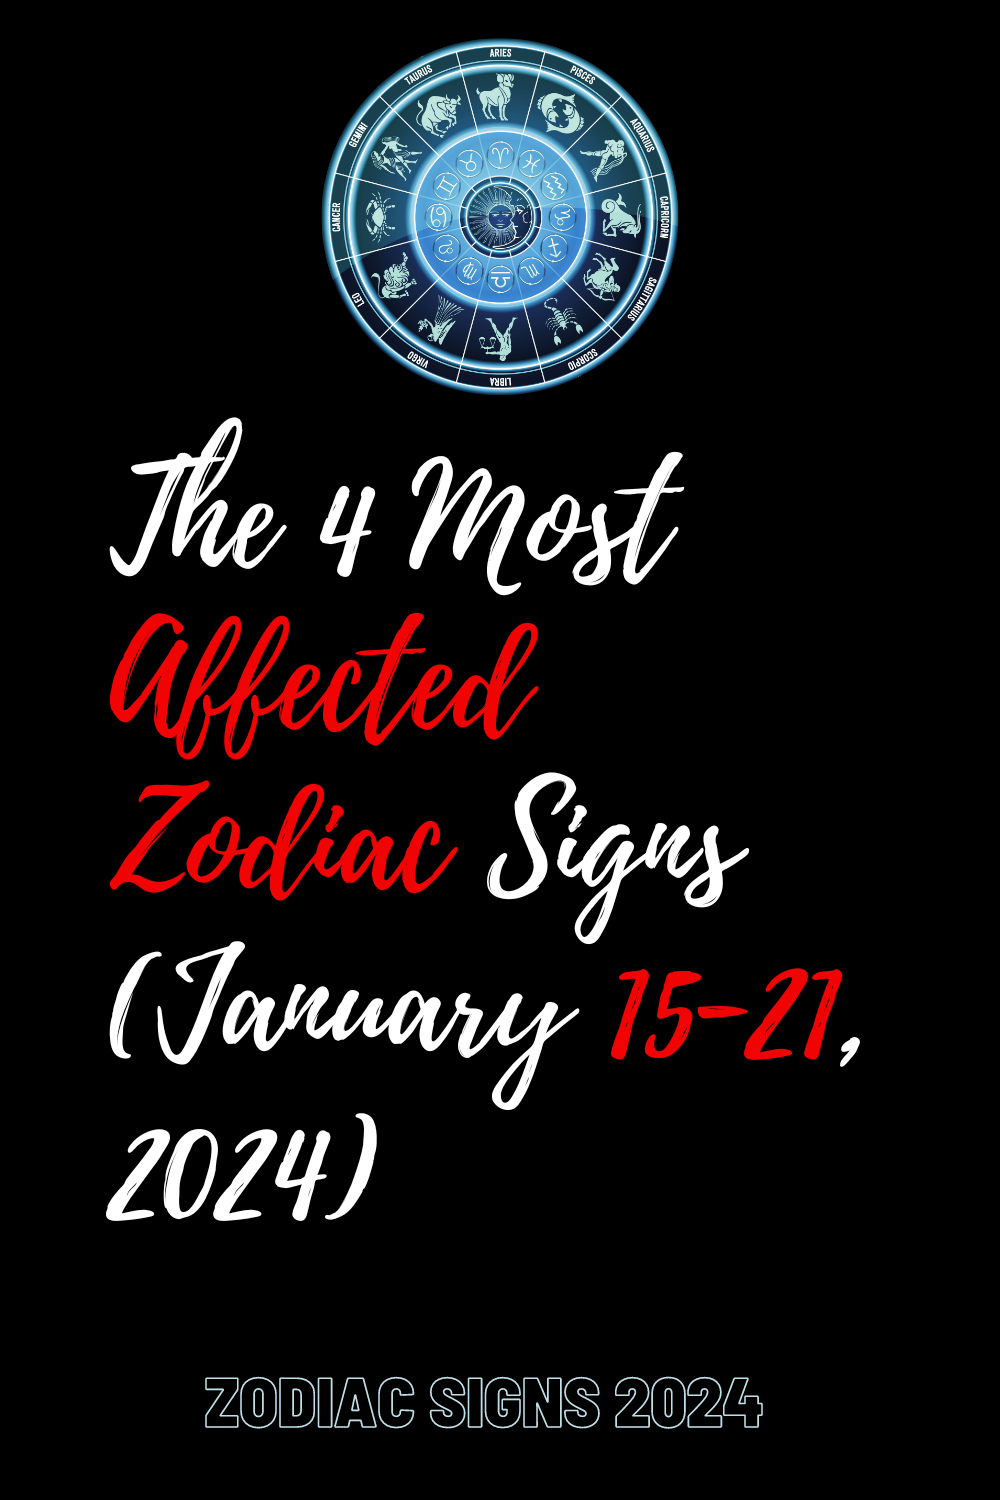 The 4 Most Affected Zodiac Signs (January 15-21, 2024)